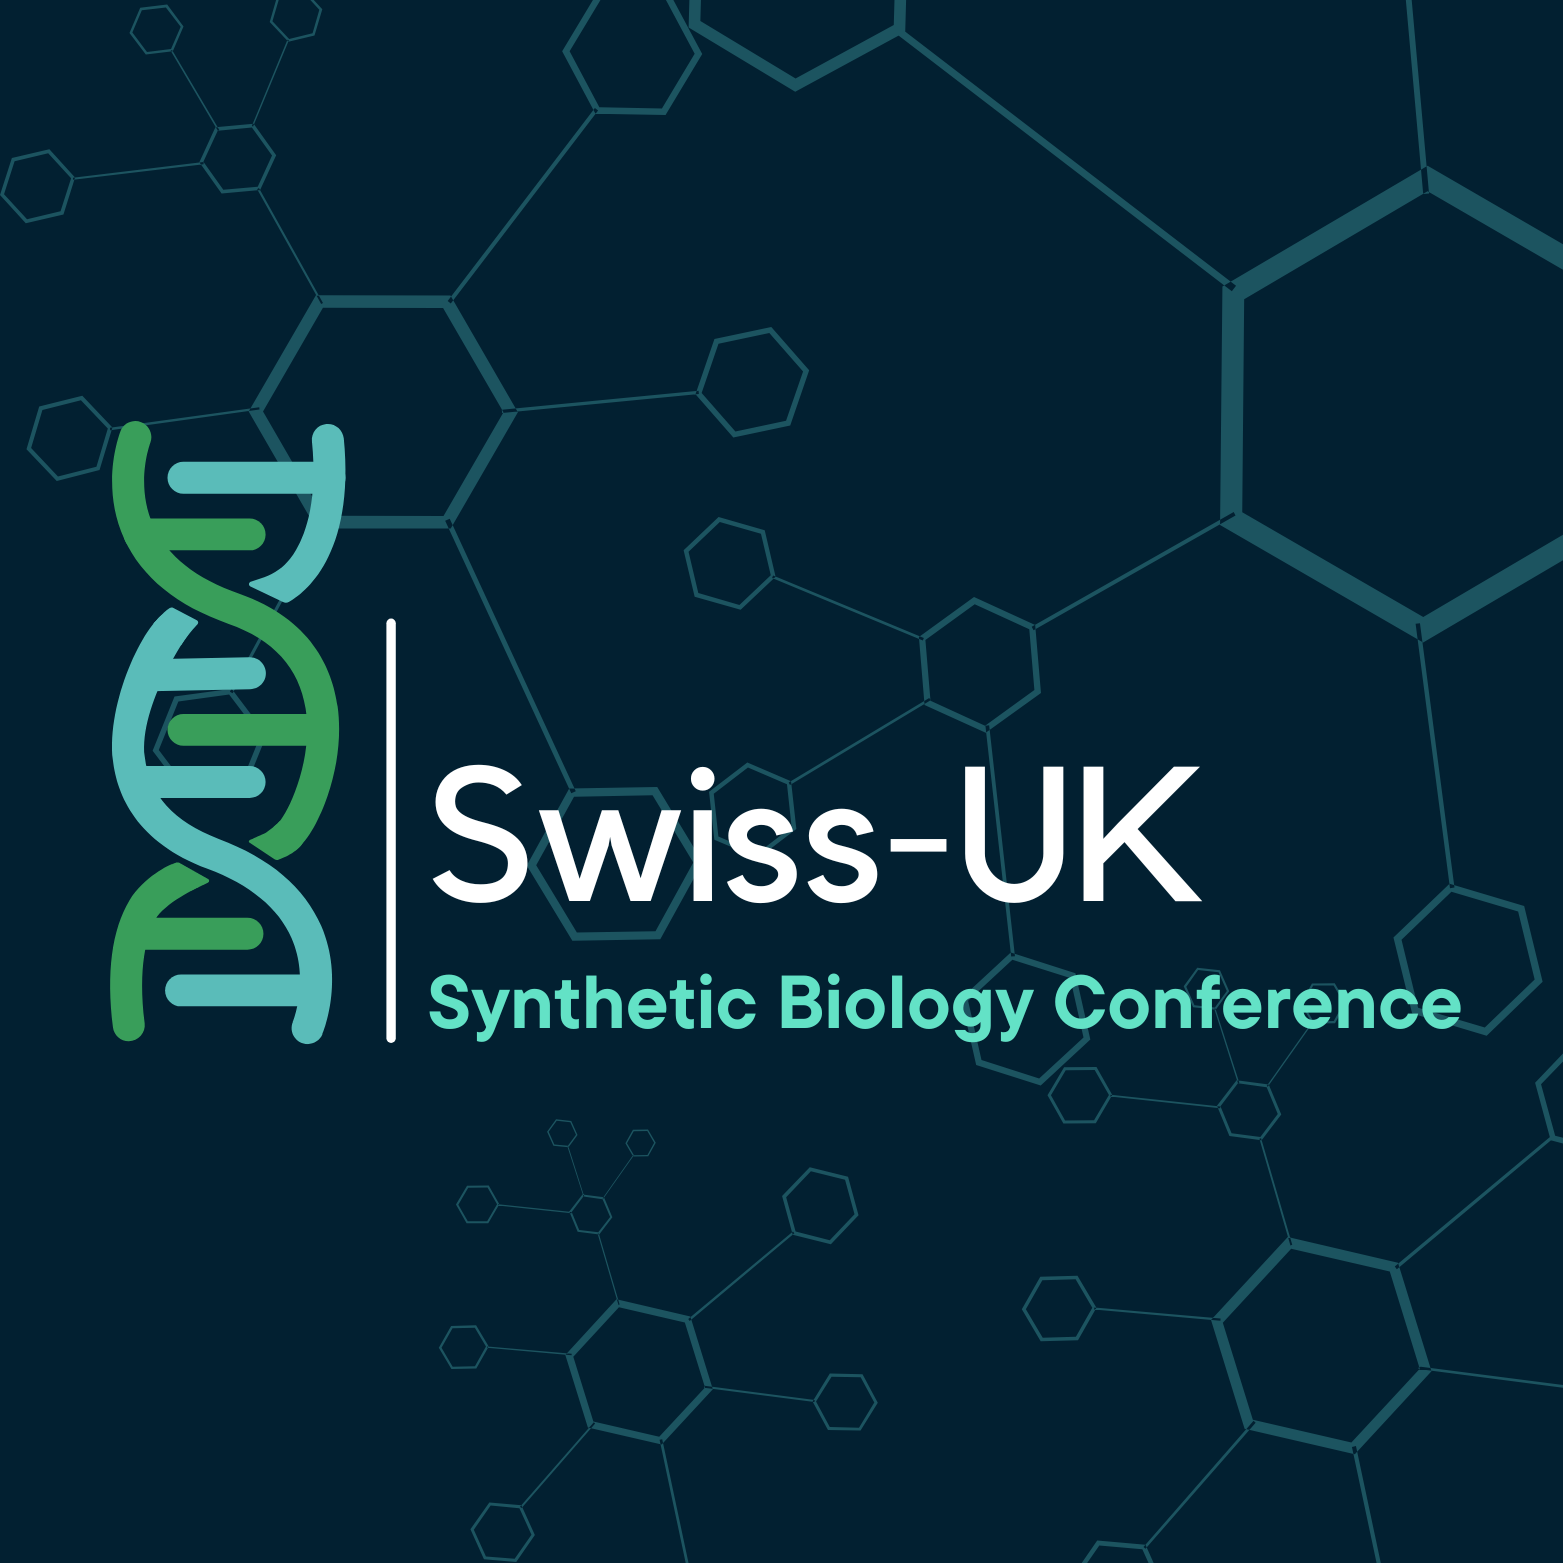 Swiss-UK Synthetic Biology Conference